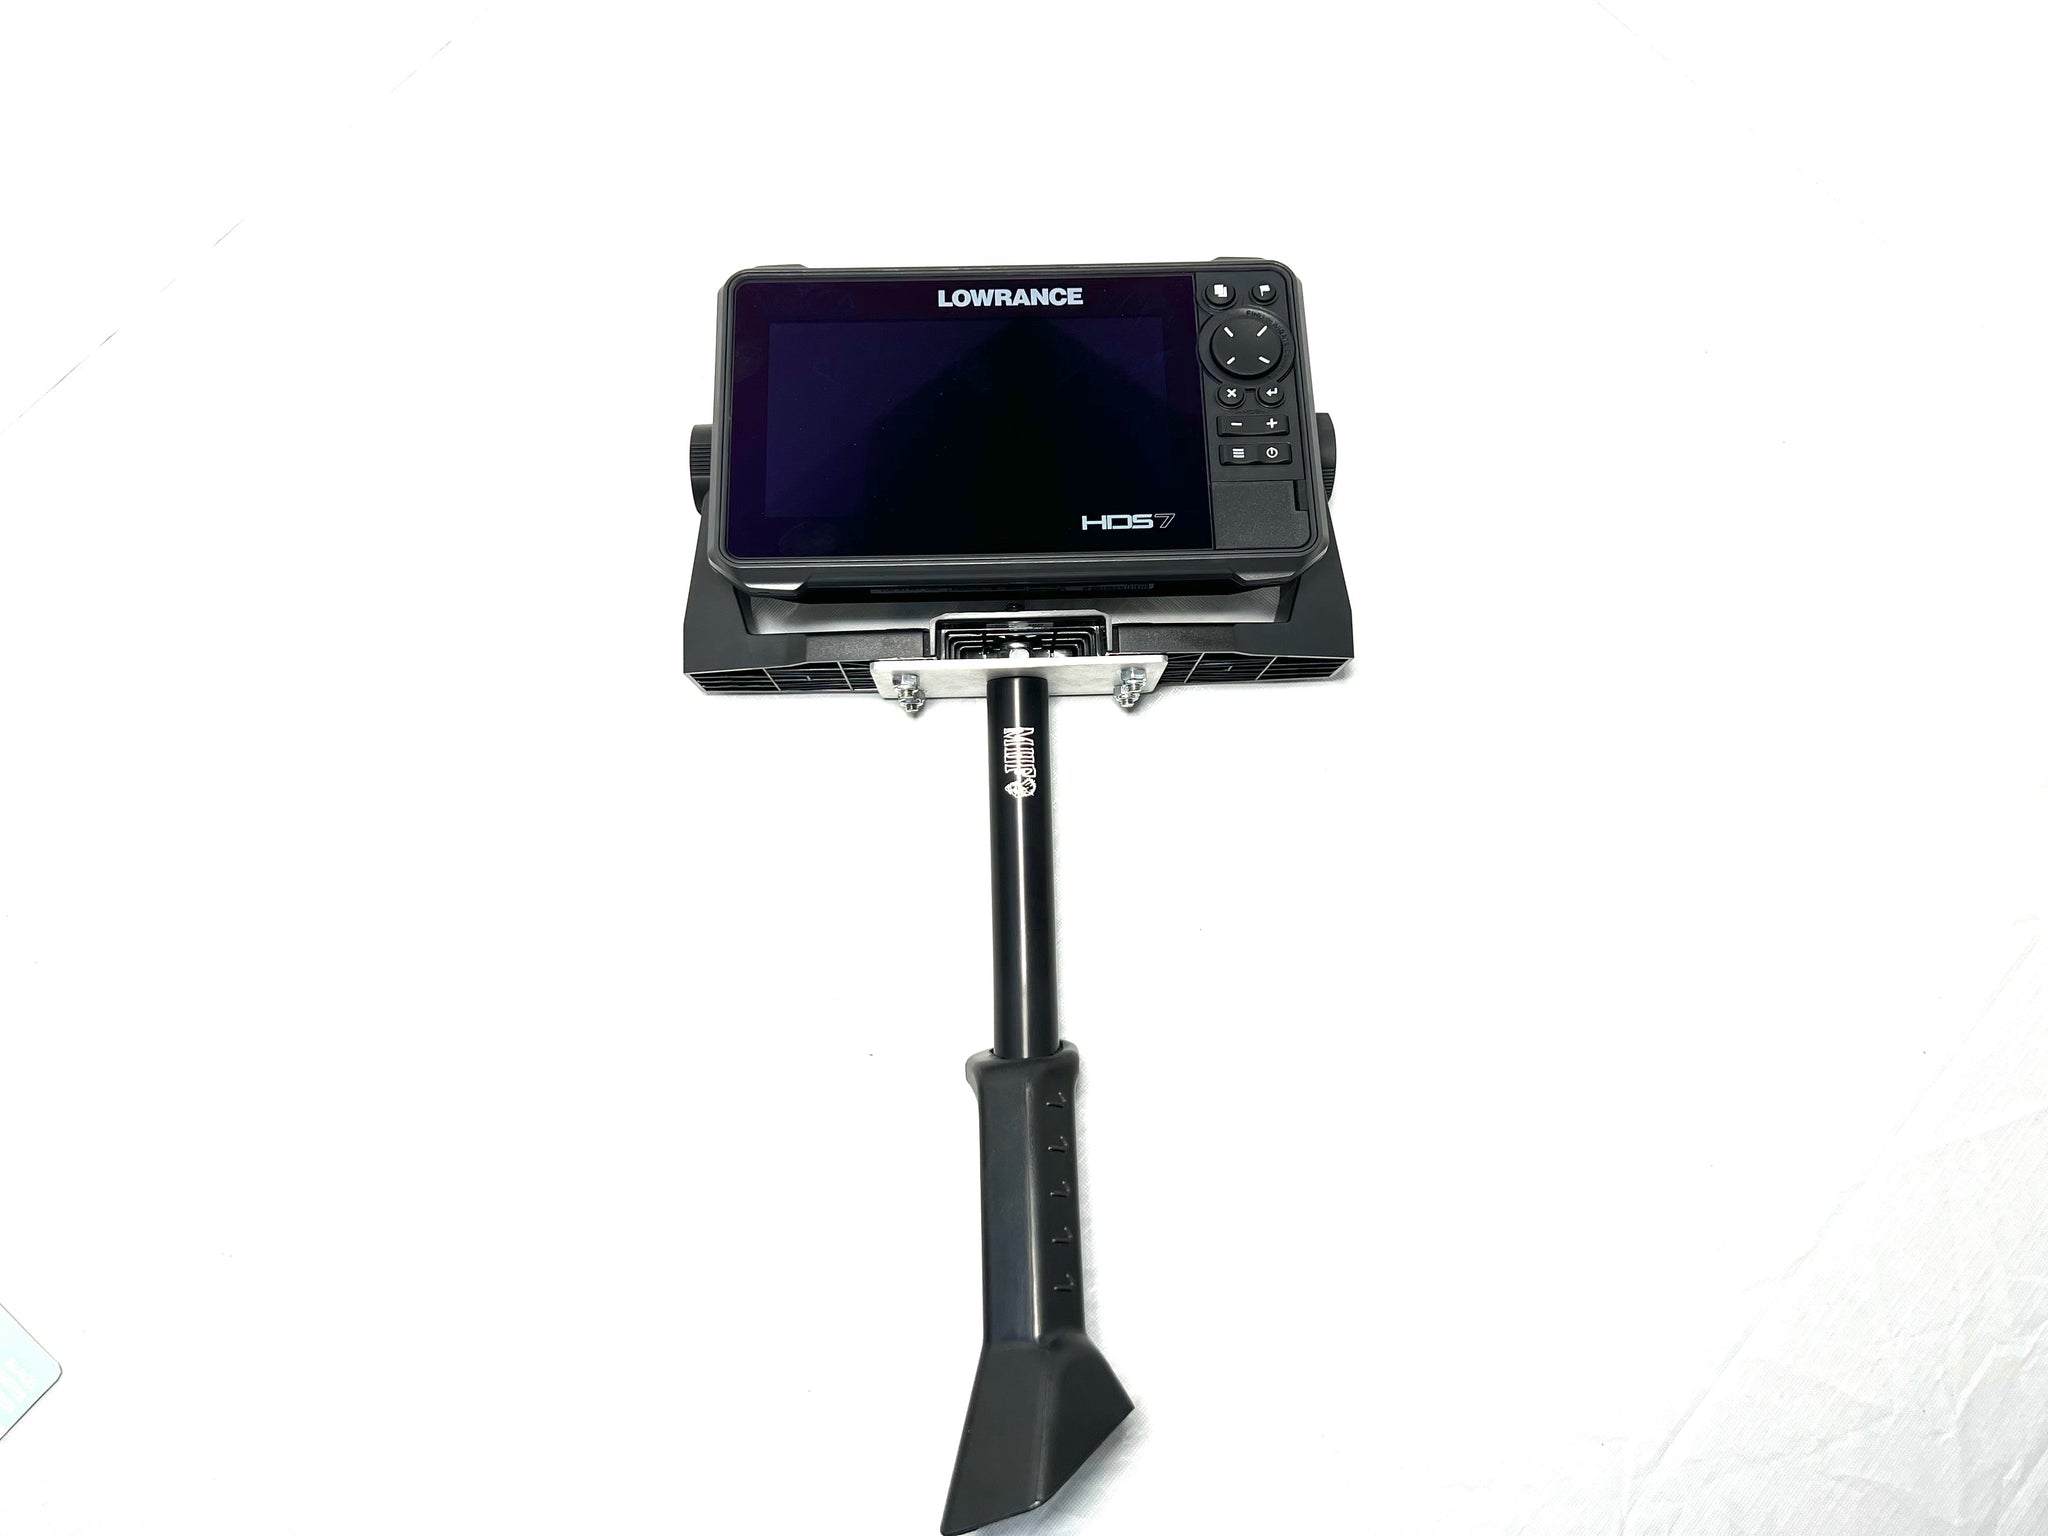 Pro XP / Pro R / Turbo R swivel mount for Lowrance GPS for grab